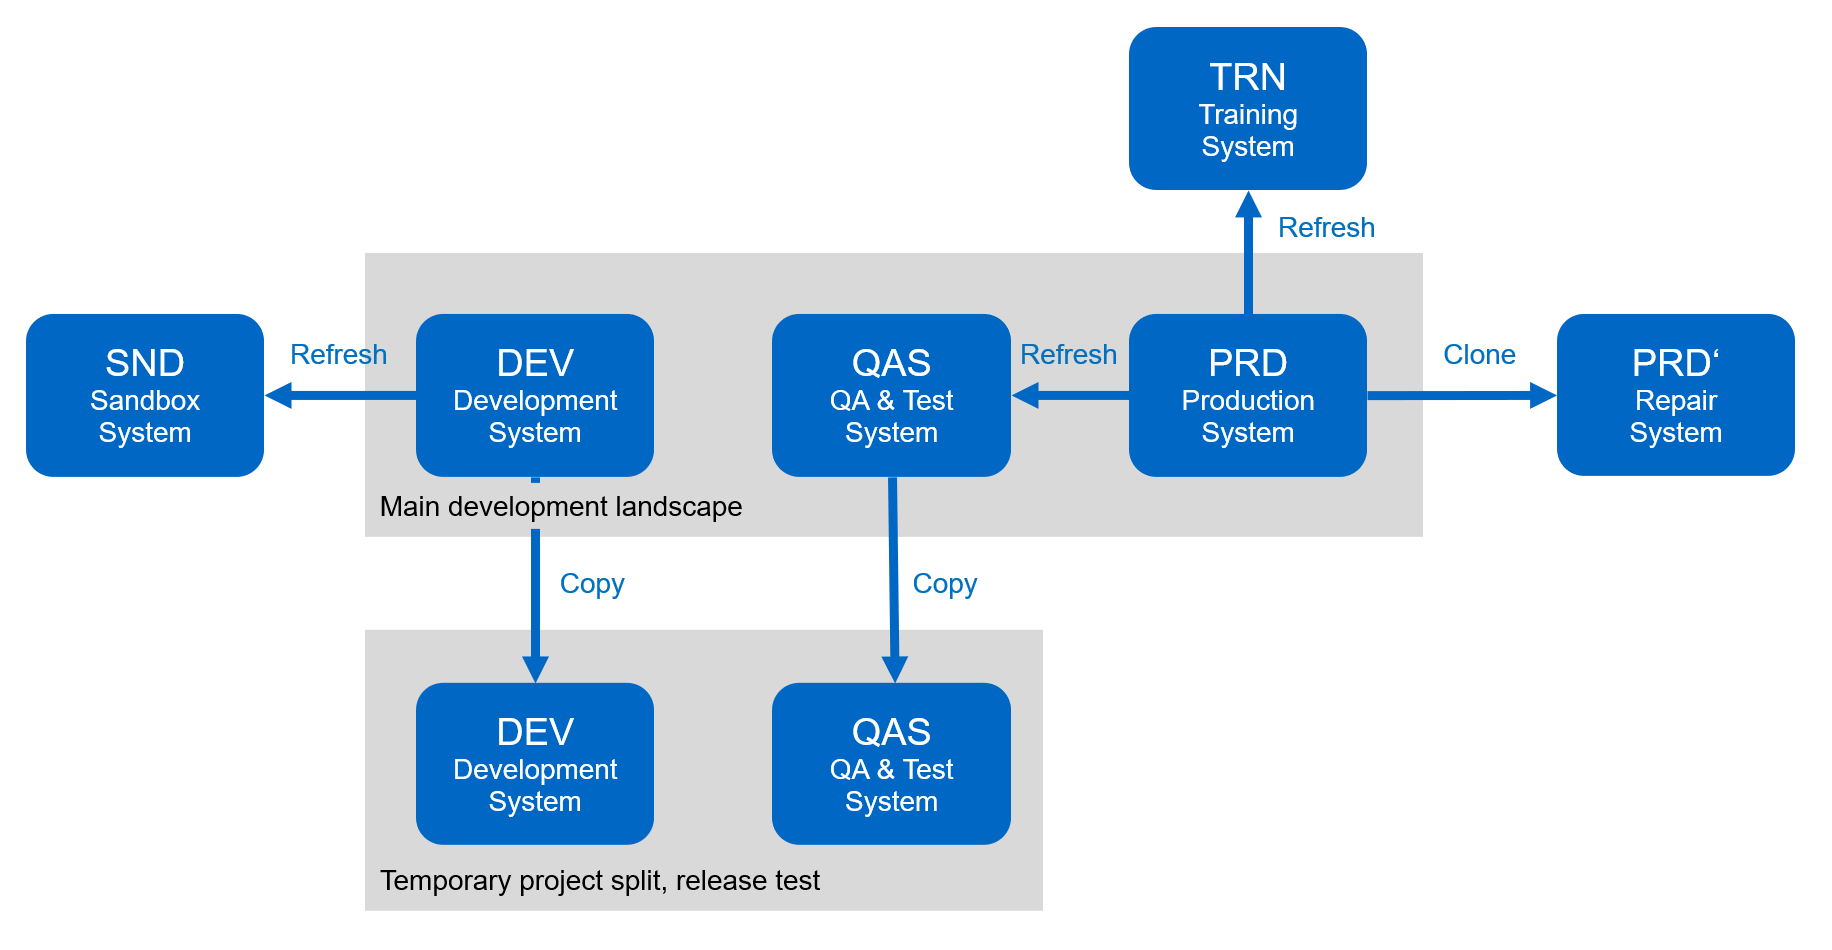 This image depicts the environmental workflow from the main development landscape to temporary project splits, repair systems, training systems, and sanbox systems. It shows where System Refresh, System Copy, and System Clone are used for these various purposes.